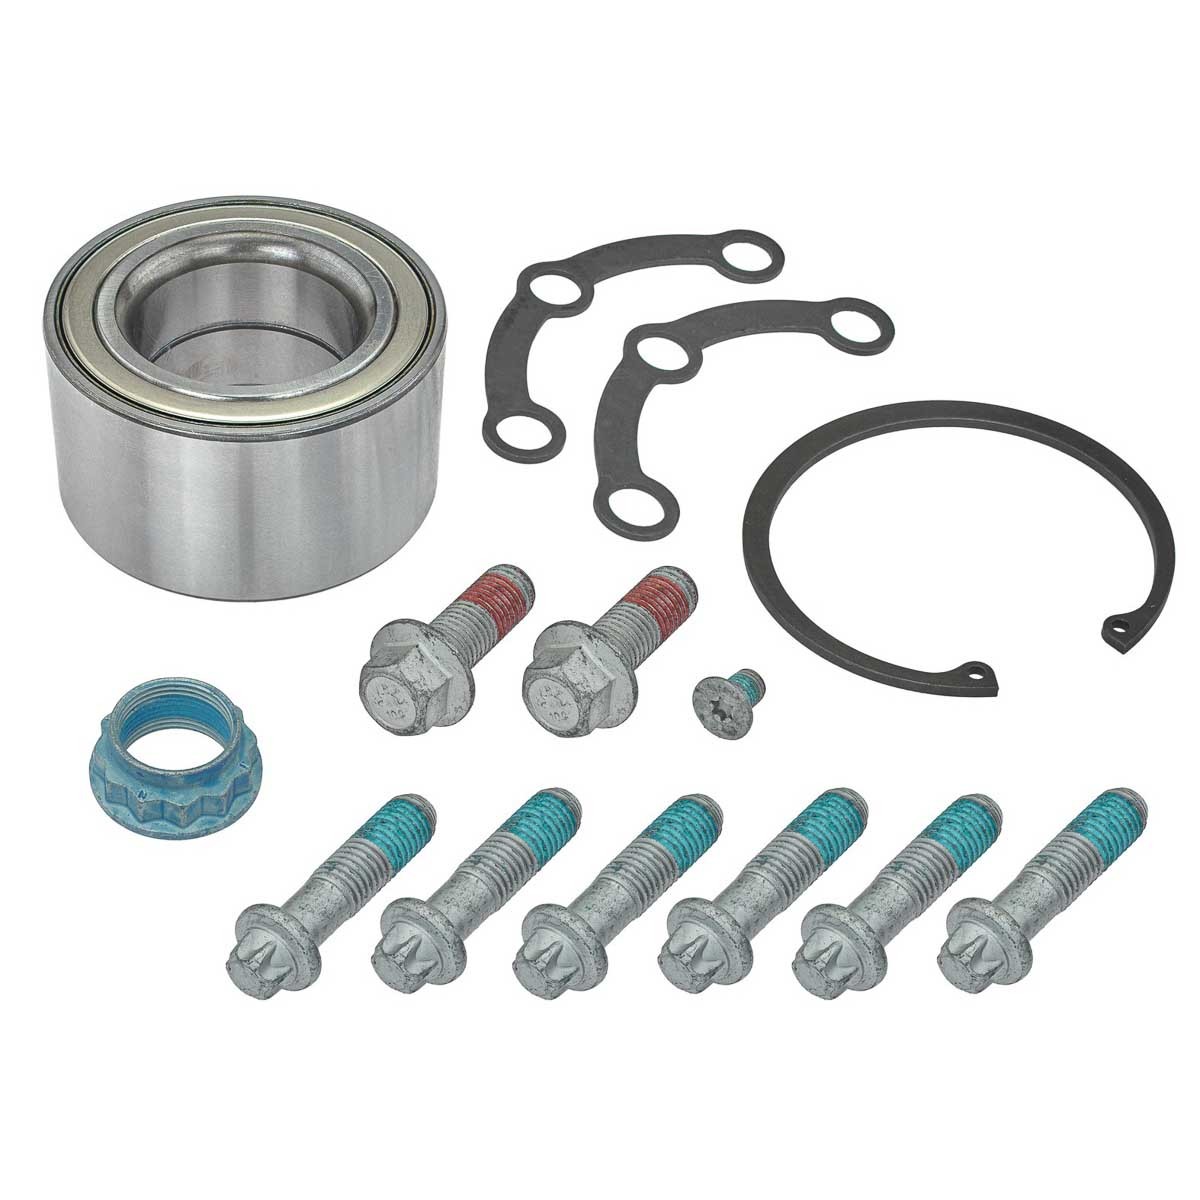 MEYLE 014 750 0005 Wheel bearing kit Rear Axle, with attachment material, ORIGINAL Quality, 88 mm, Ball Bearing